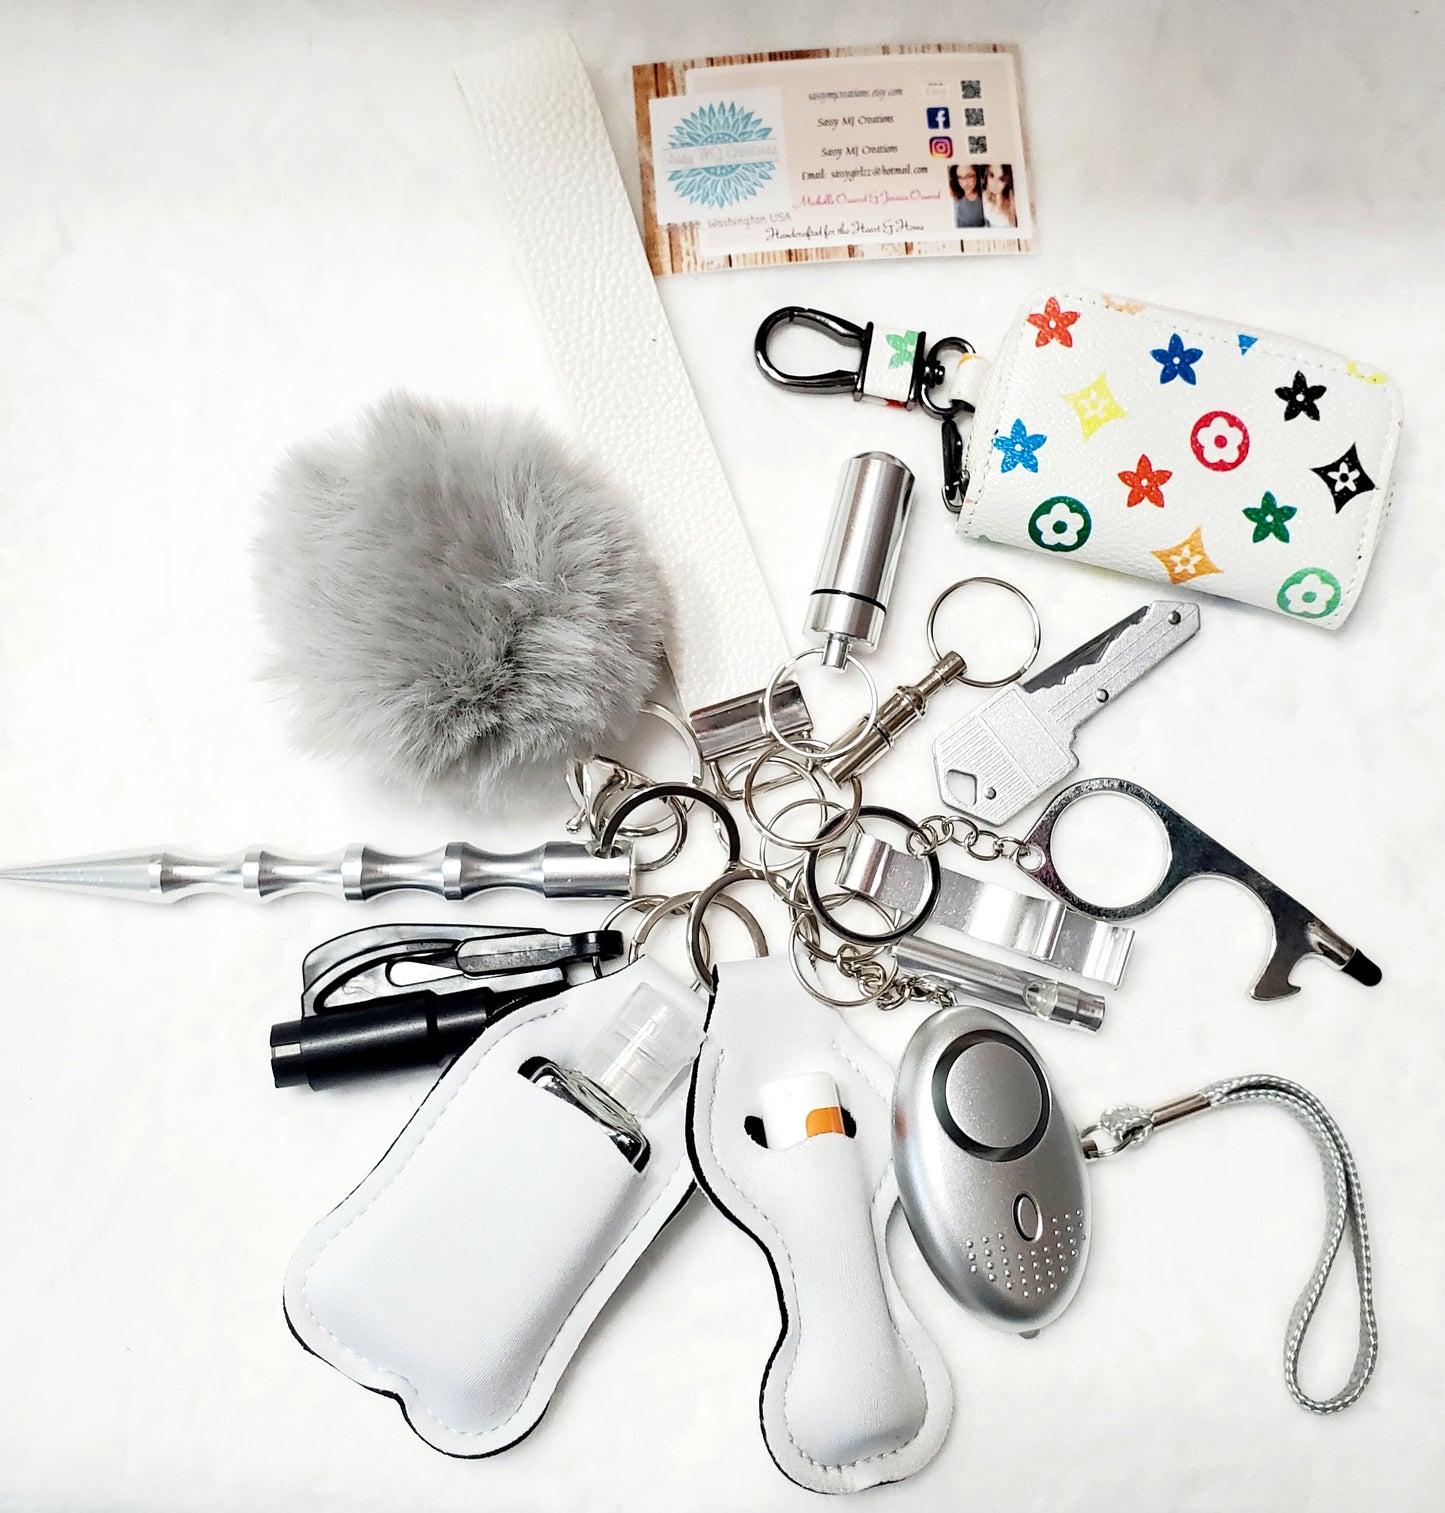 White & Silver Safety Keychain Set-Personal Safety Kit 16 pc.